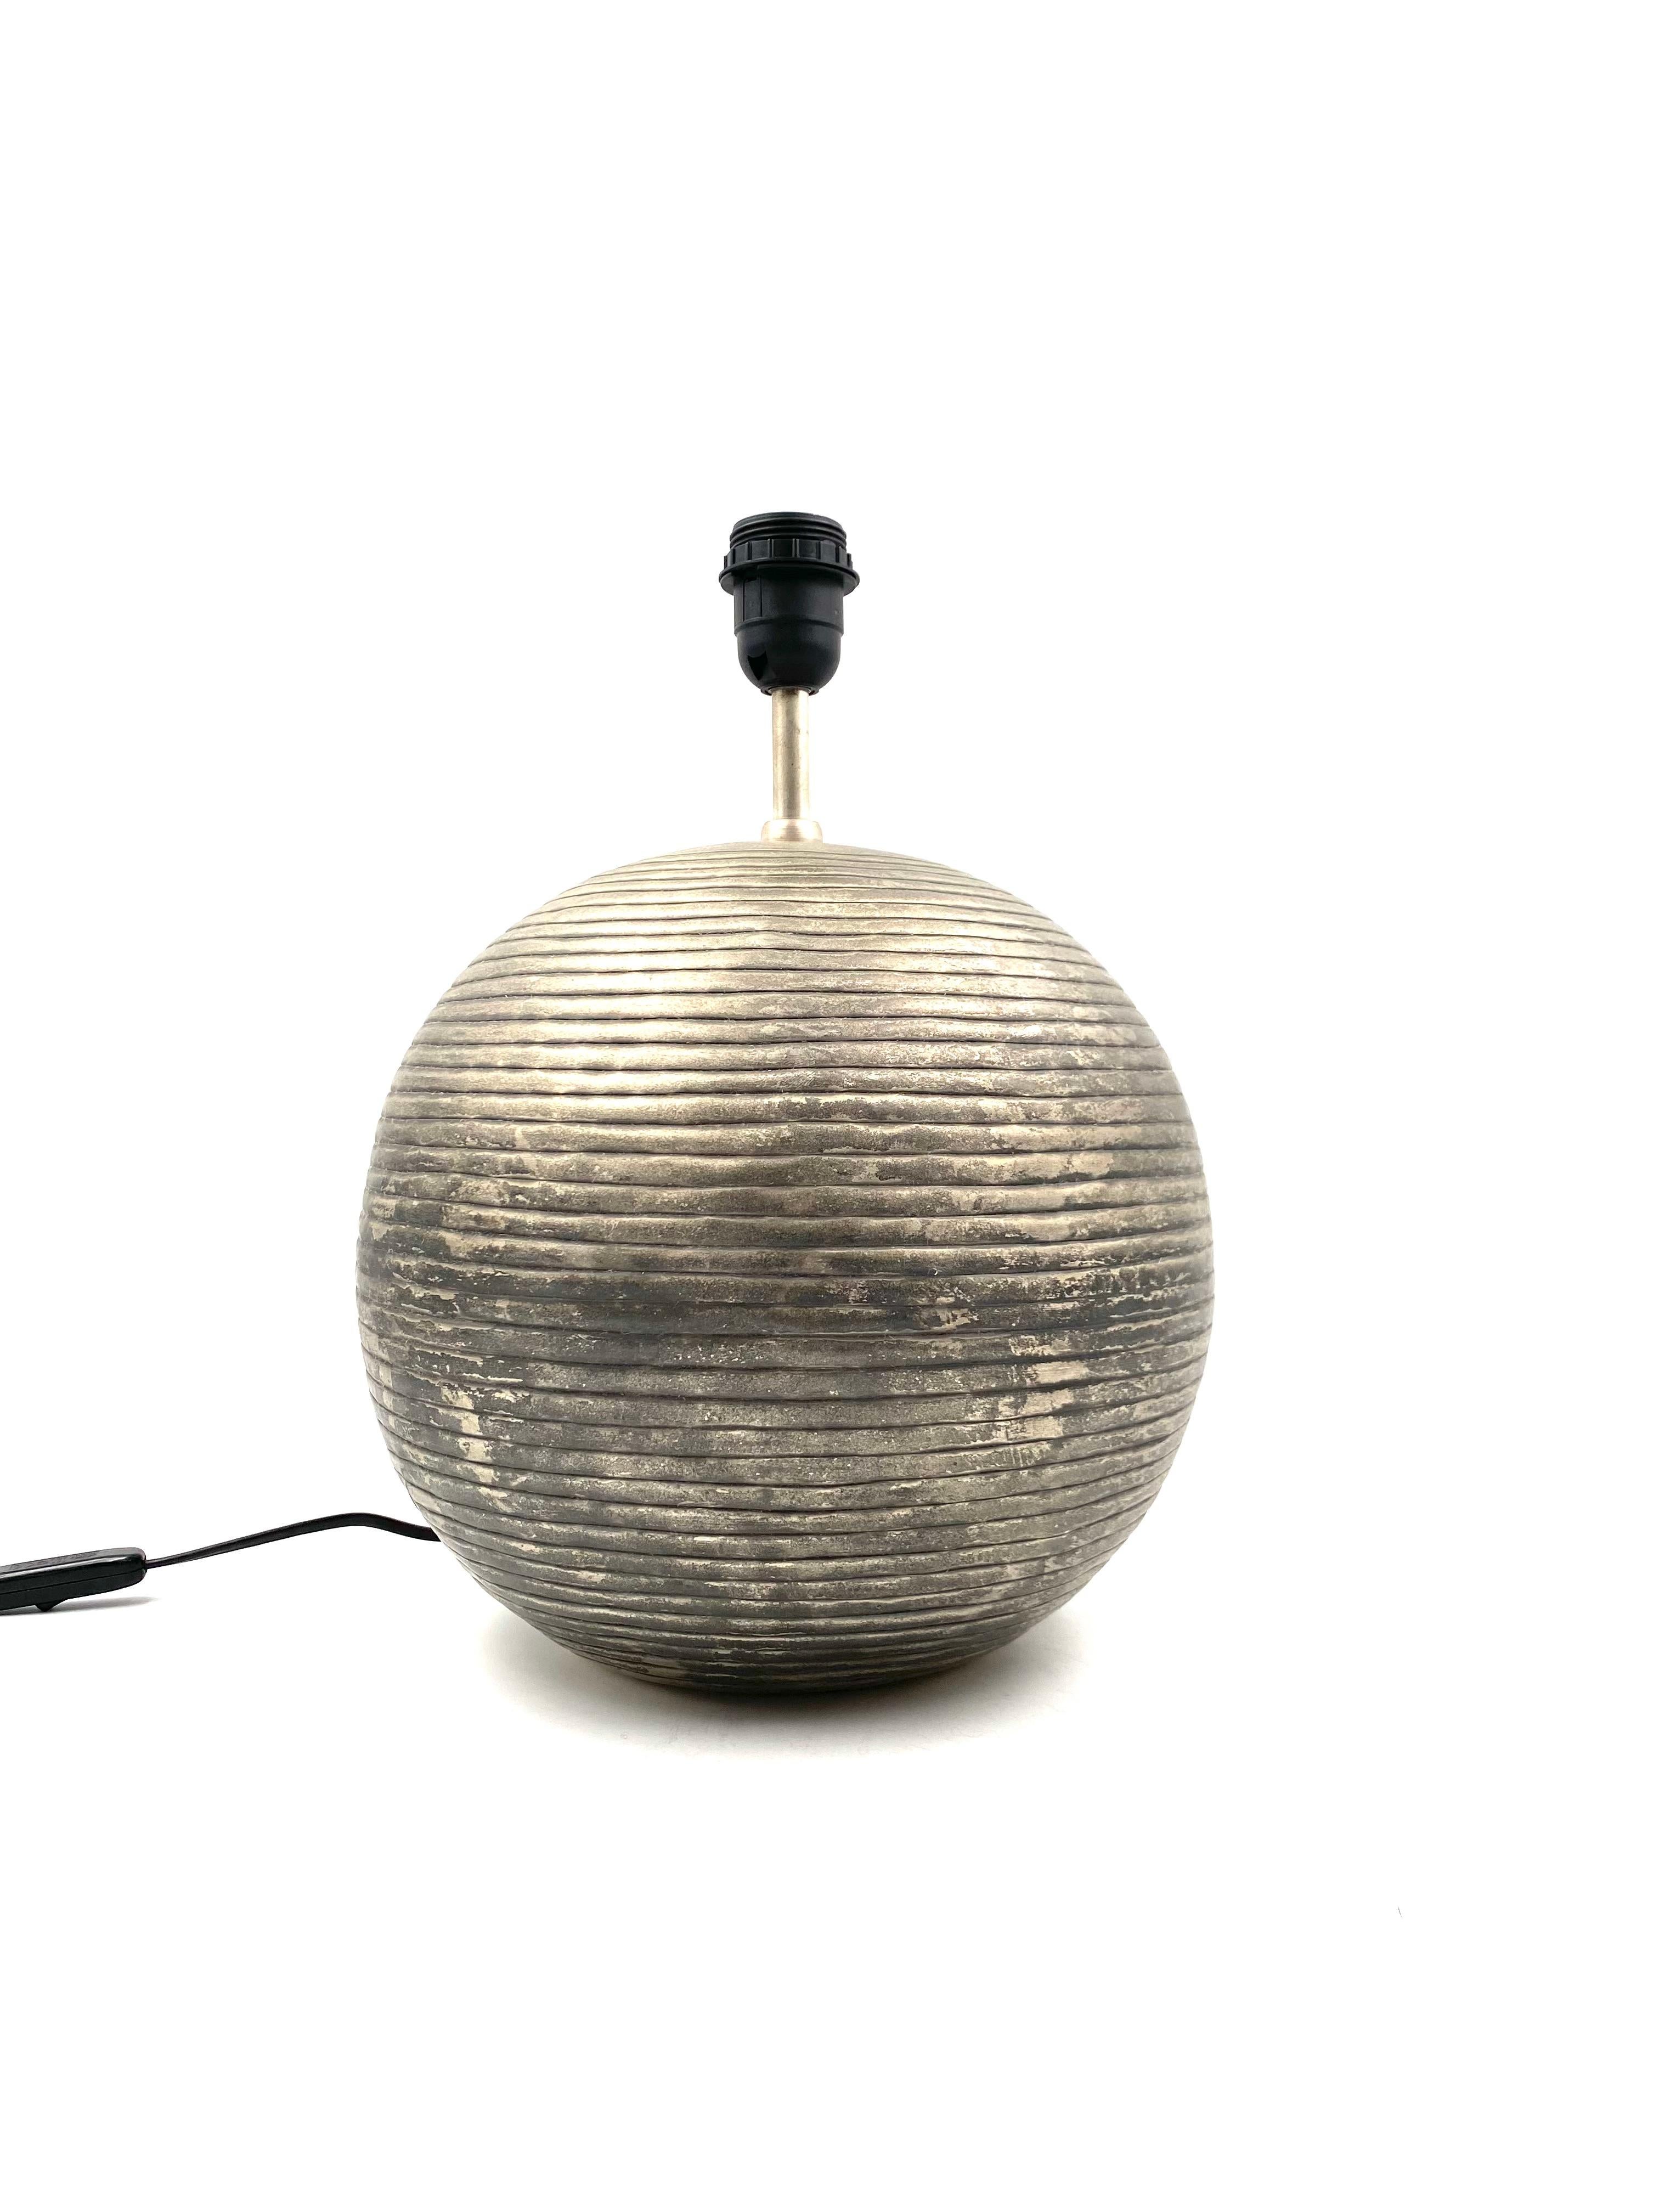 Spherical aluminum table lamp base

Italian manufacture, 1970s

Measures: 40 Height x 30 diameter cm

Conditions: excellent, consistent with age and use. Patina on the metal. In working conditions.